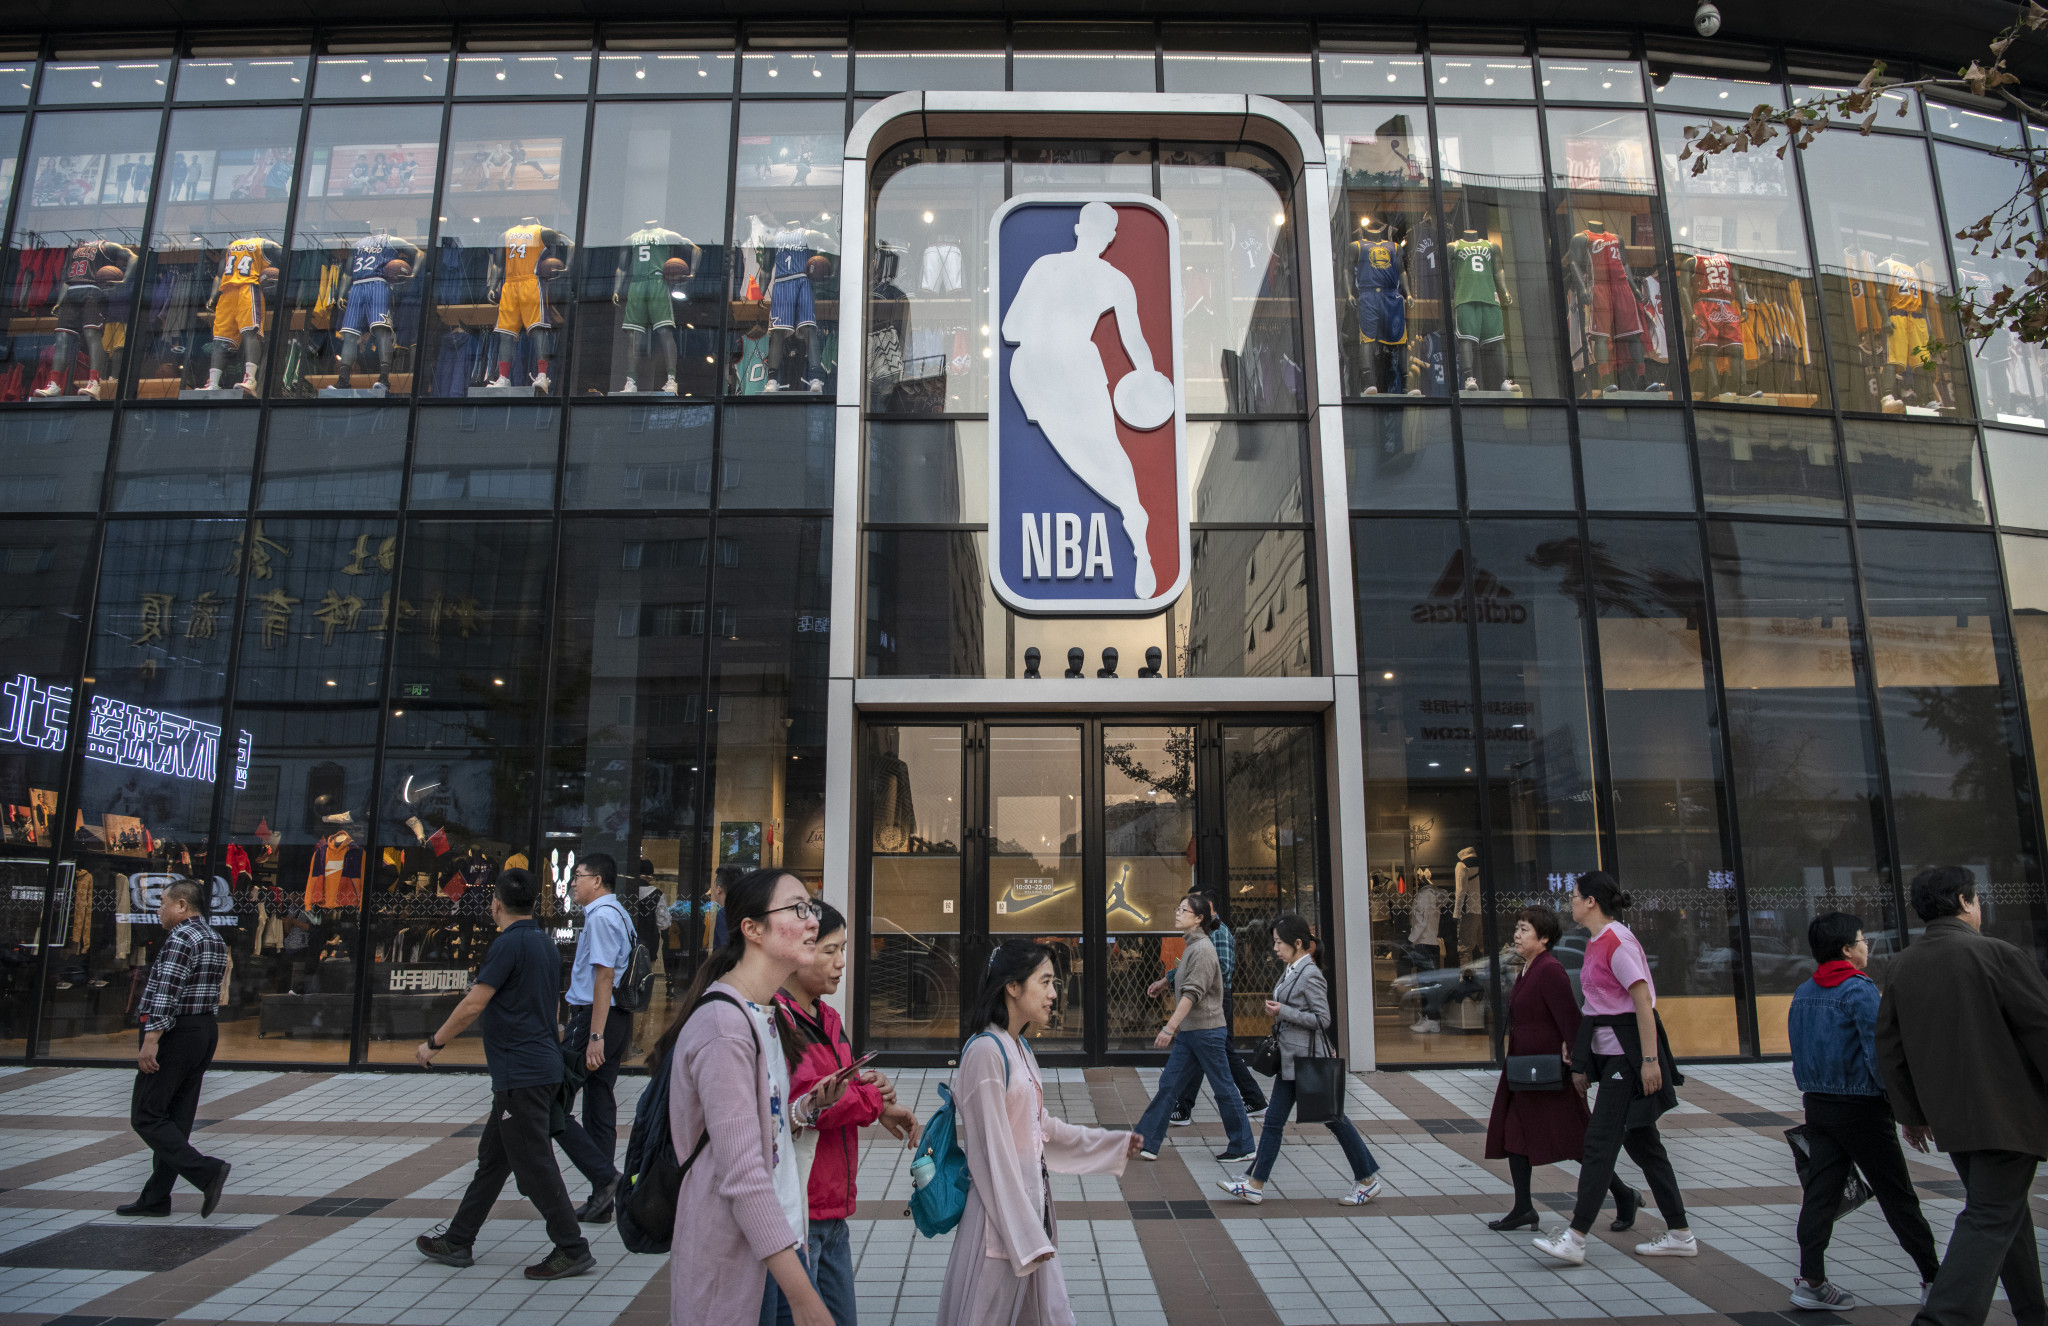 The NBA's main Beijing store was opened during Derek Chang's tenure ©Getty Images